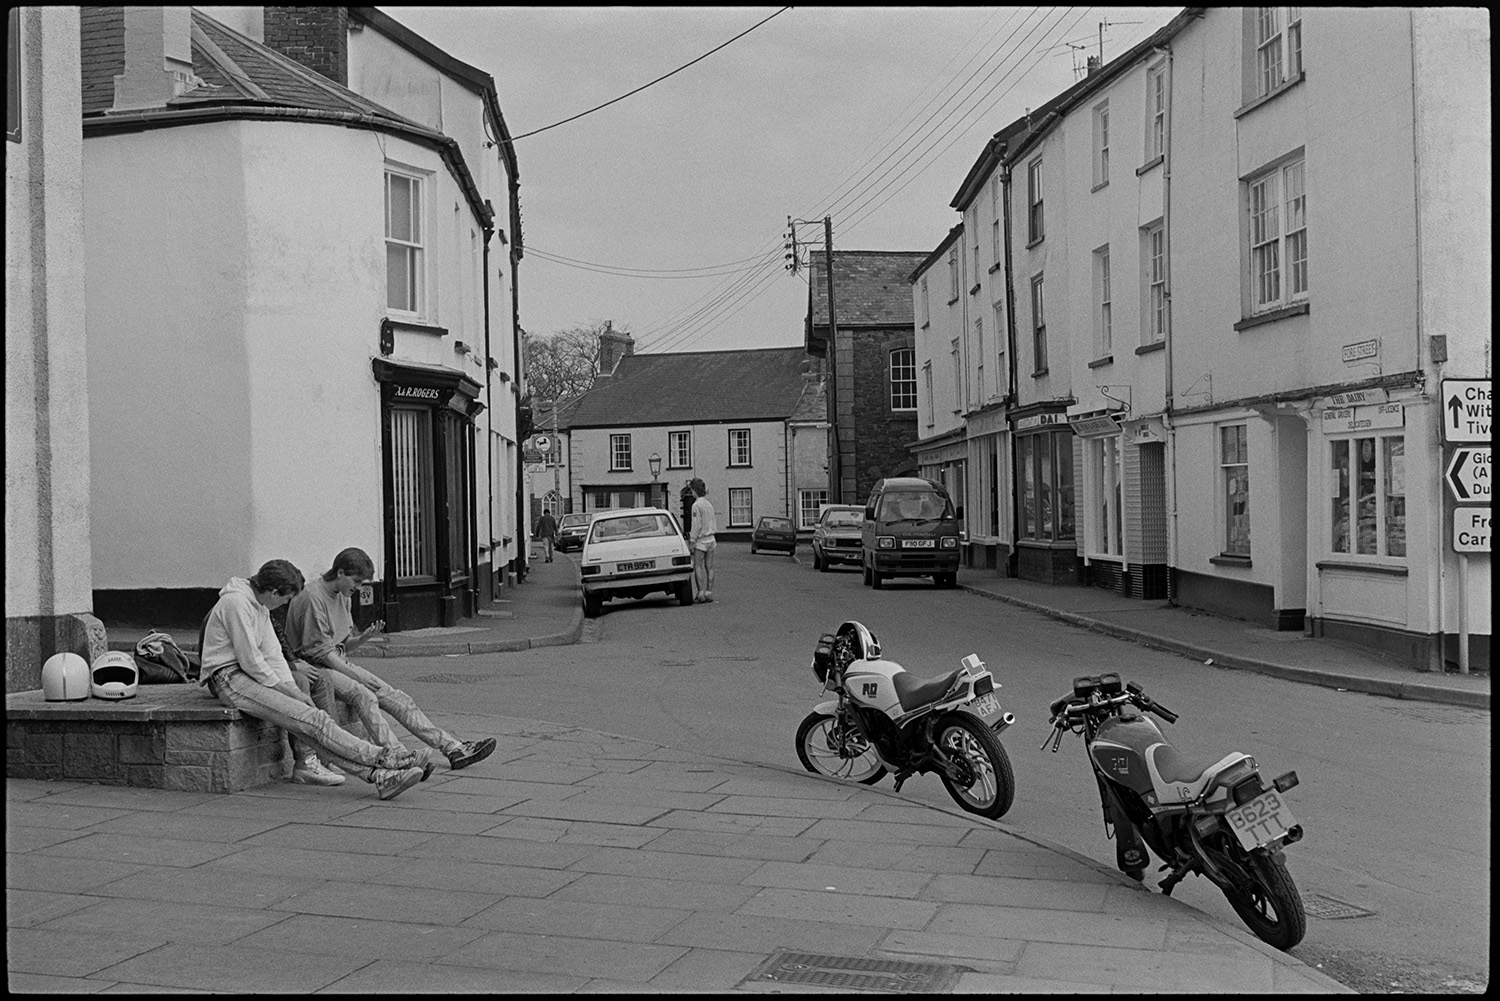 Street scenes with motorbikes.
[Young men sitting on a seat on the side of the street with parked motorbikes and cars in Fore Street, Chulmleigh. Shop fronts can be seen along the street.]